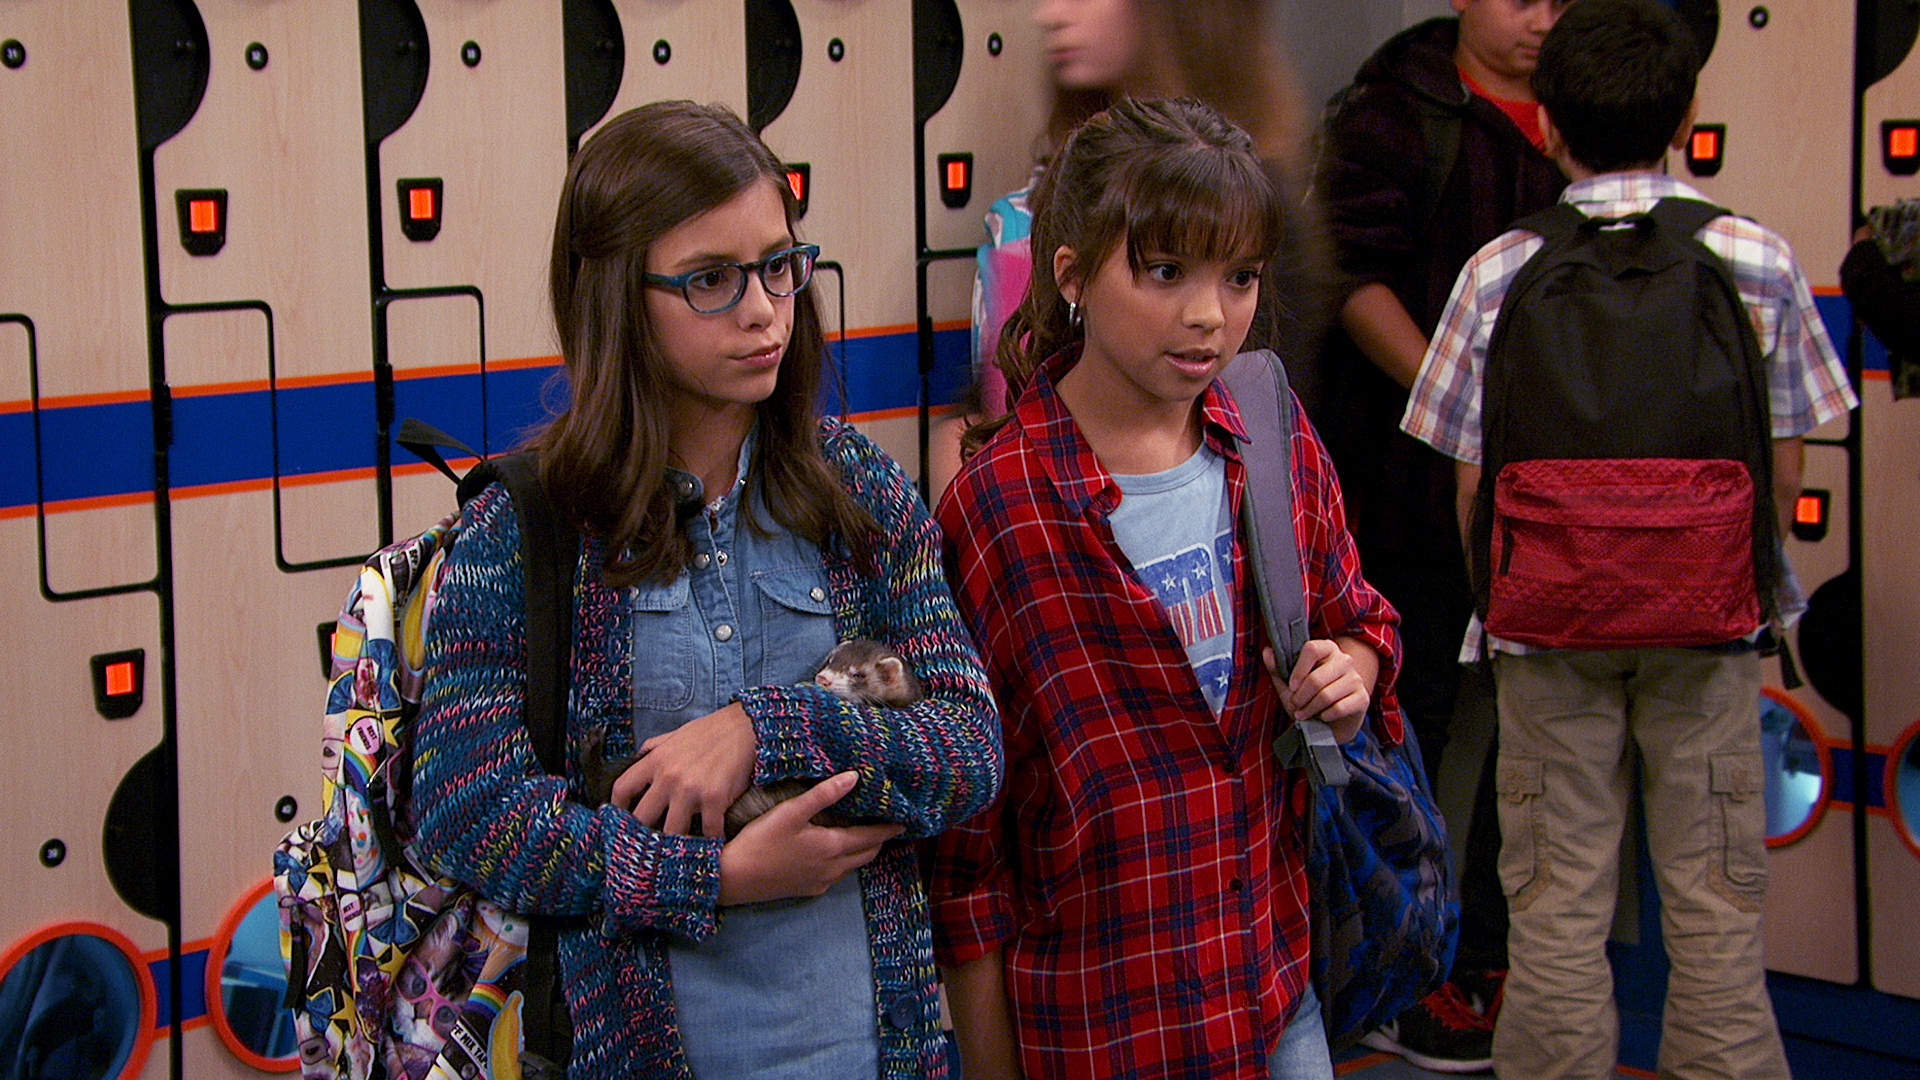 GameShakers on X: Babe is that one friend who only cares if she